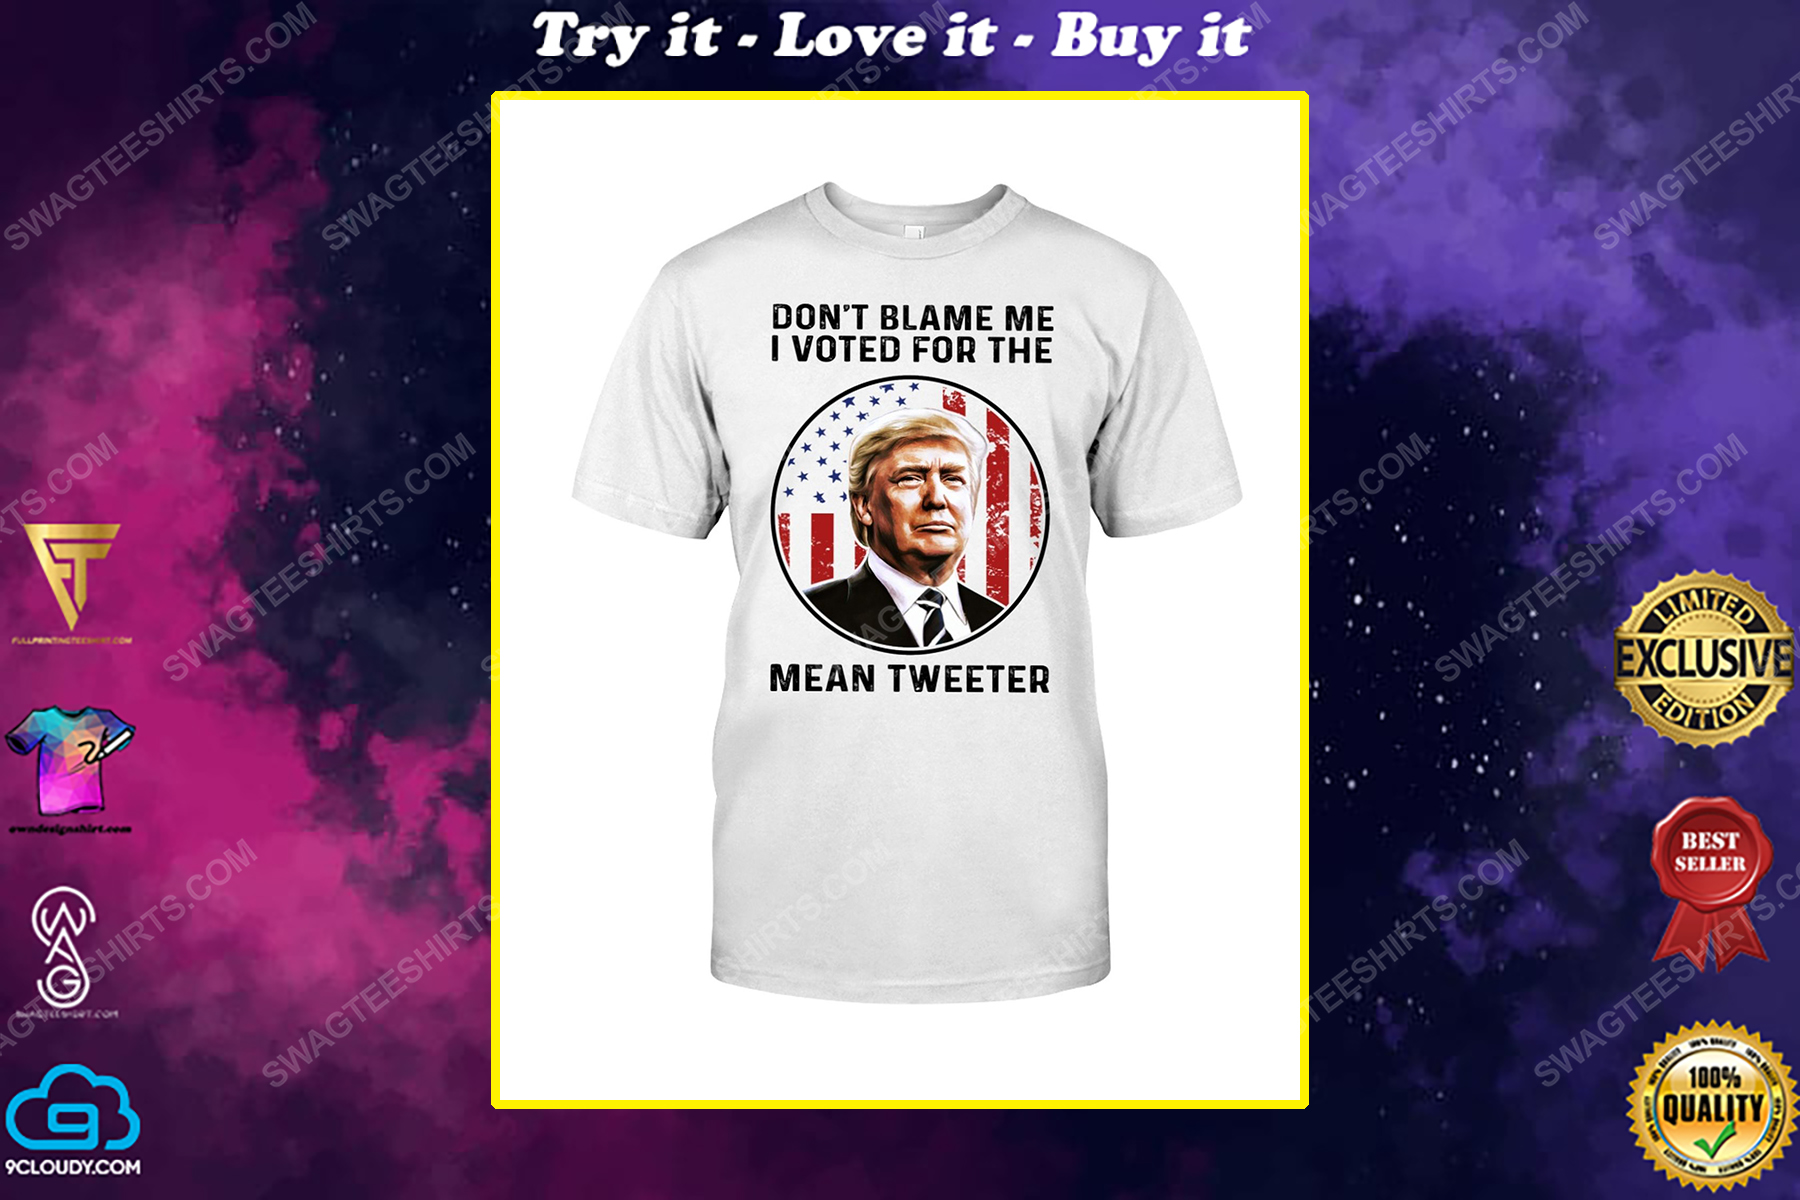 Trump don't blame me i voted for the mean tweeter shirt